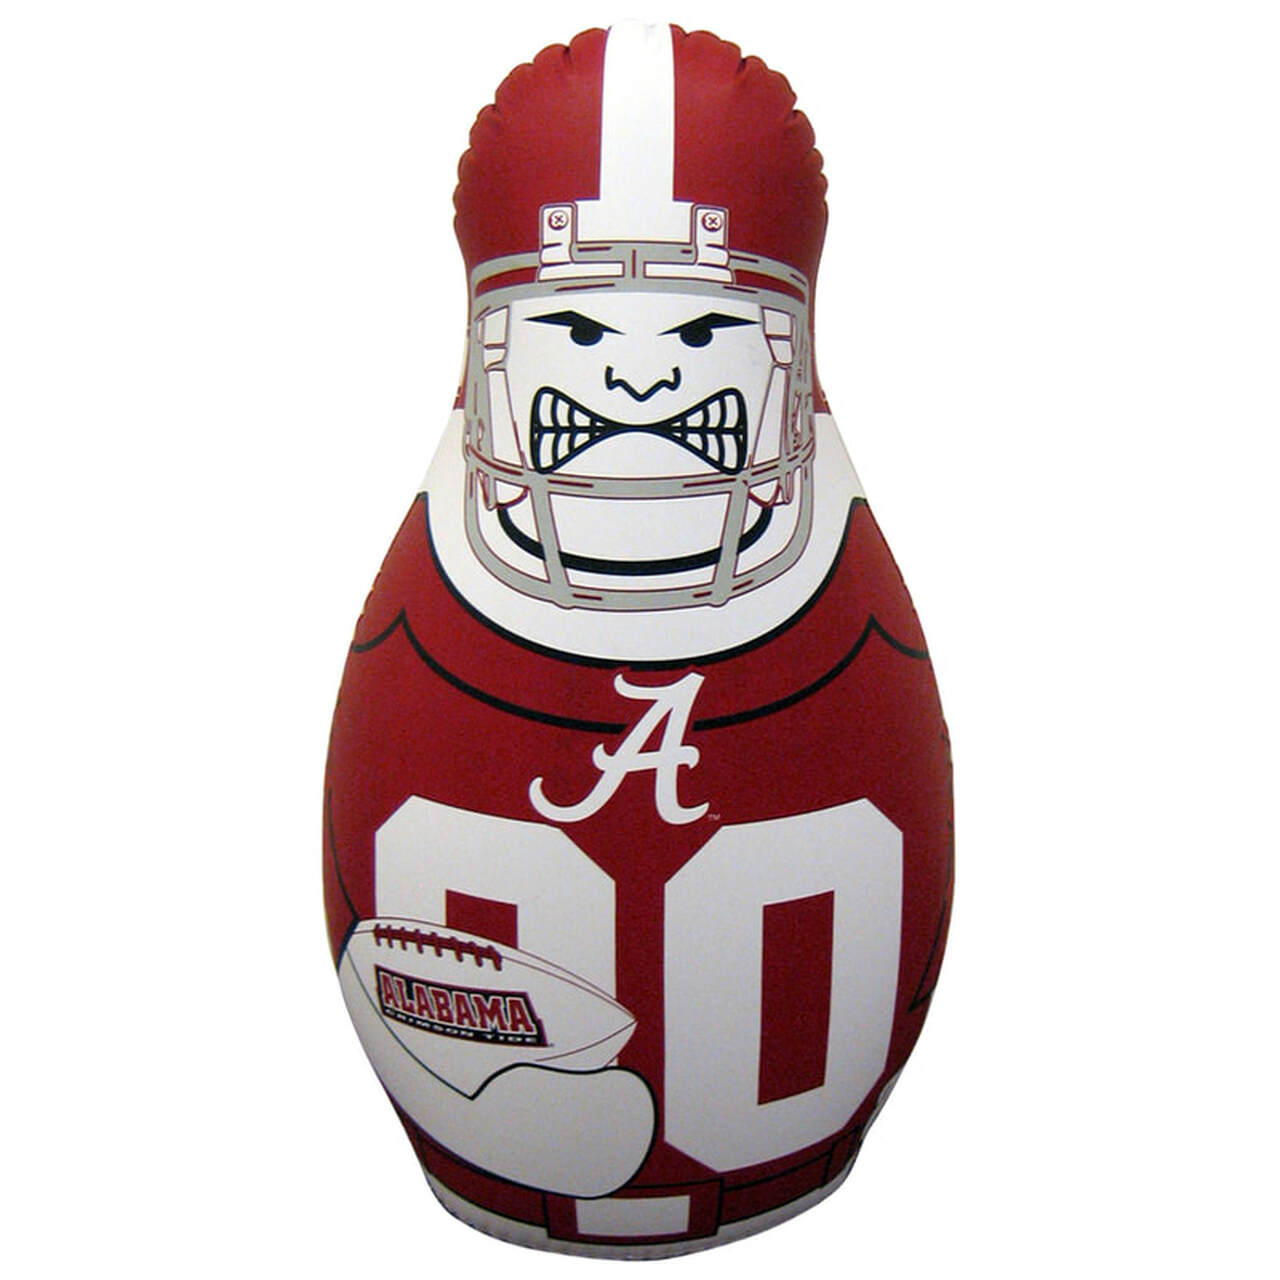 Kids Inflatable toy punching bag with Alabama Crimson Tide football player graphics